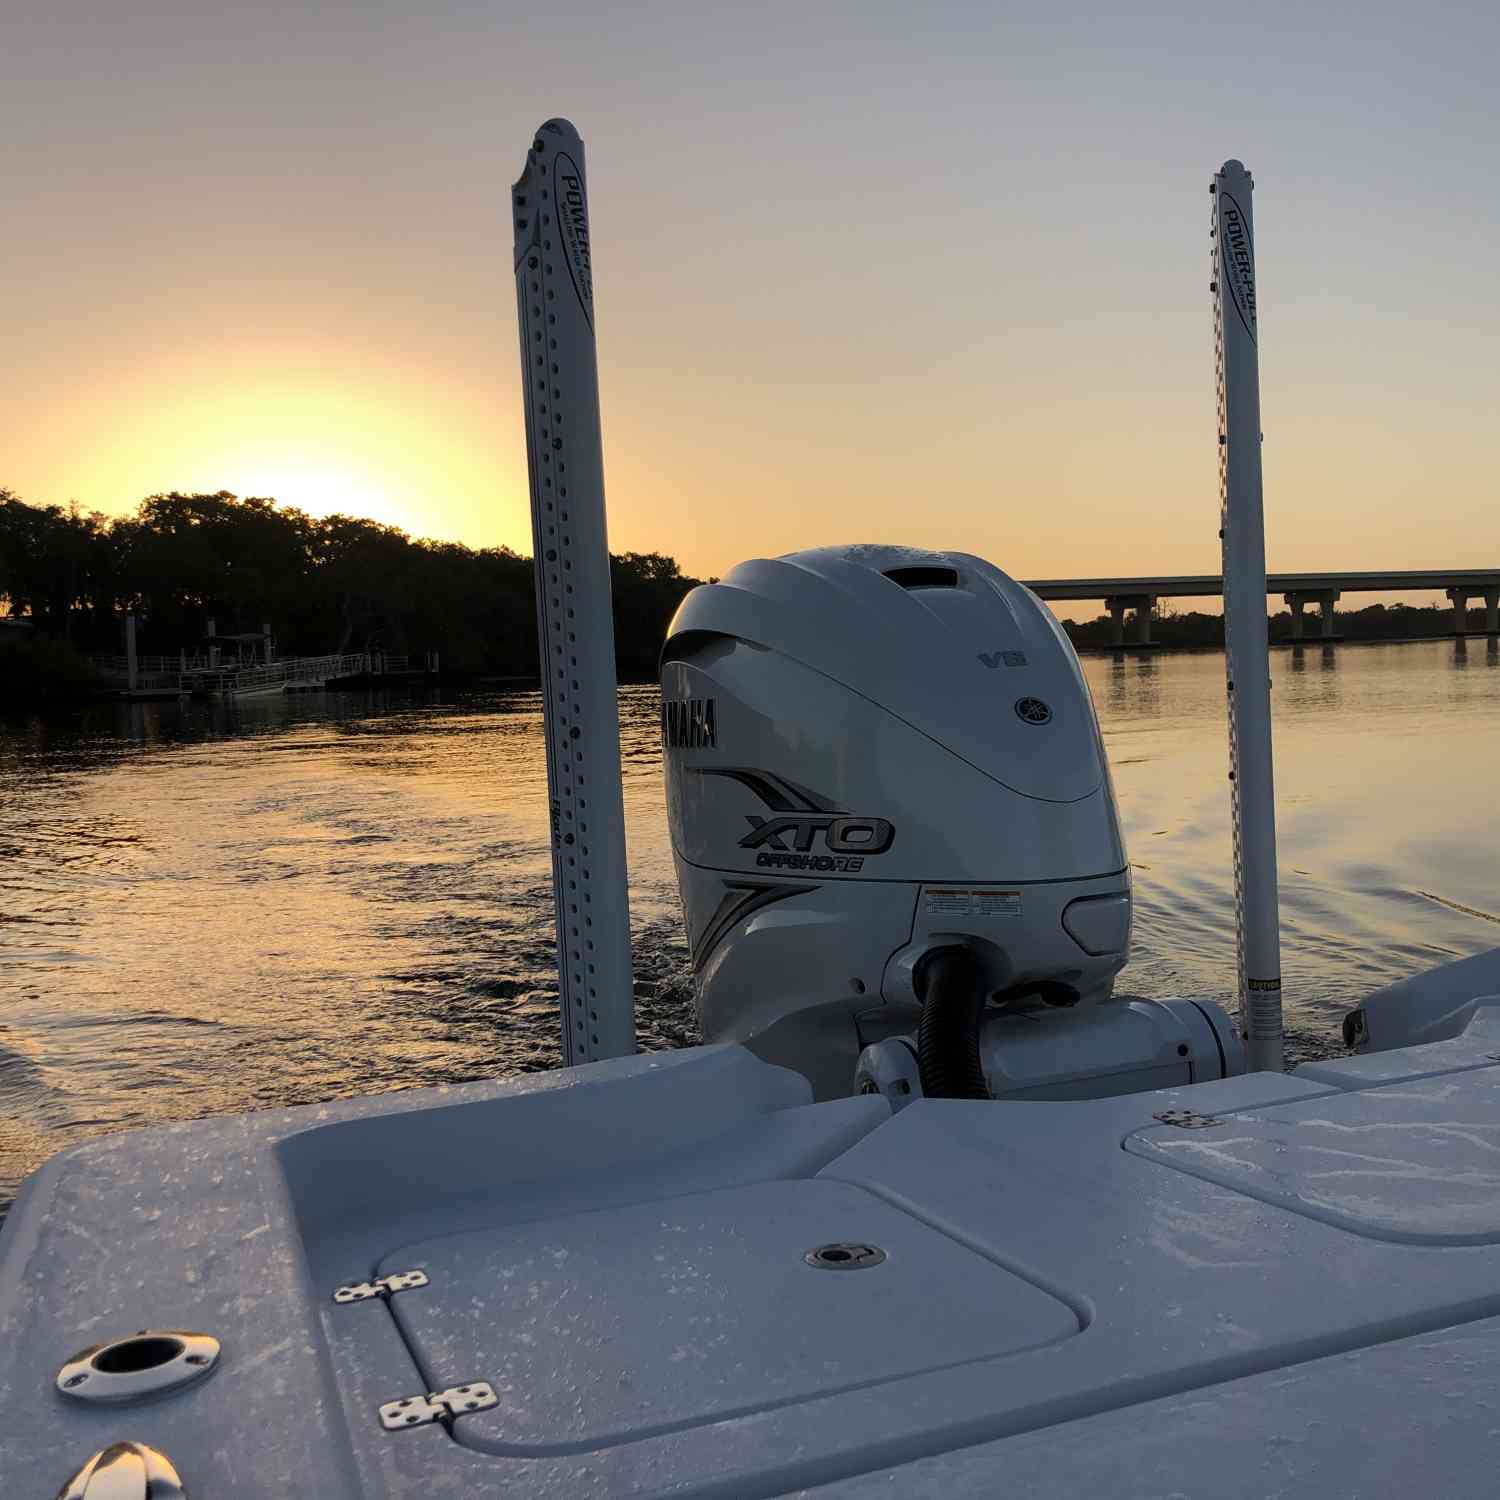 Title: Early Bird Gets The Fish - On board their Sportsman Masters 267 Bay Boat - Location: Bradenton Florida. Participating in the Photo Contest #SportsmanApril2020